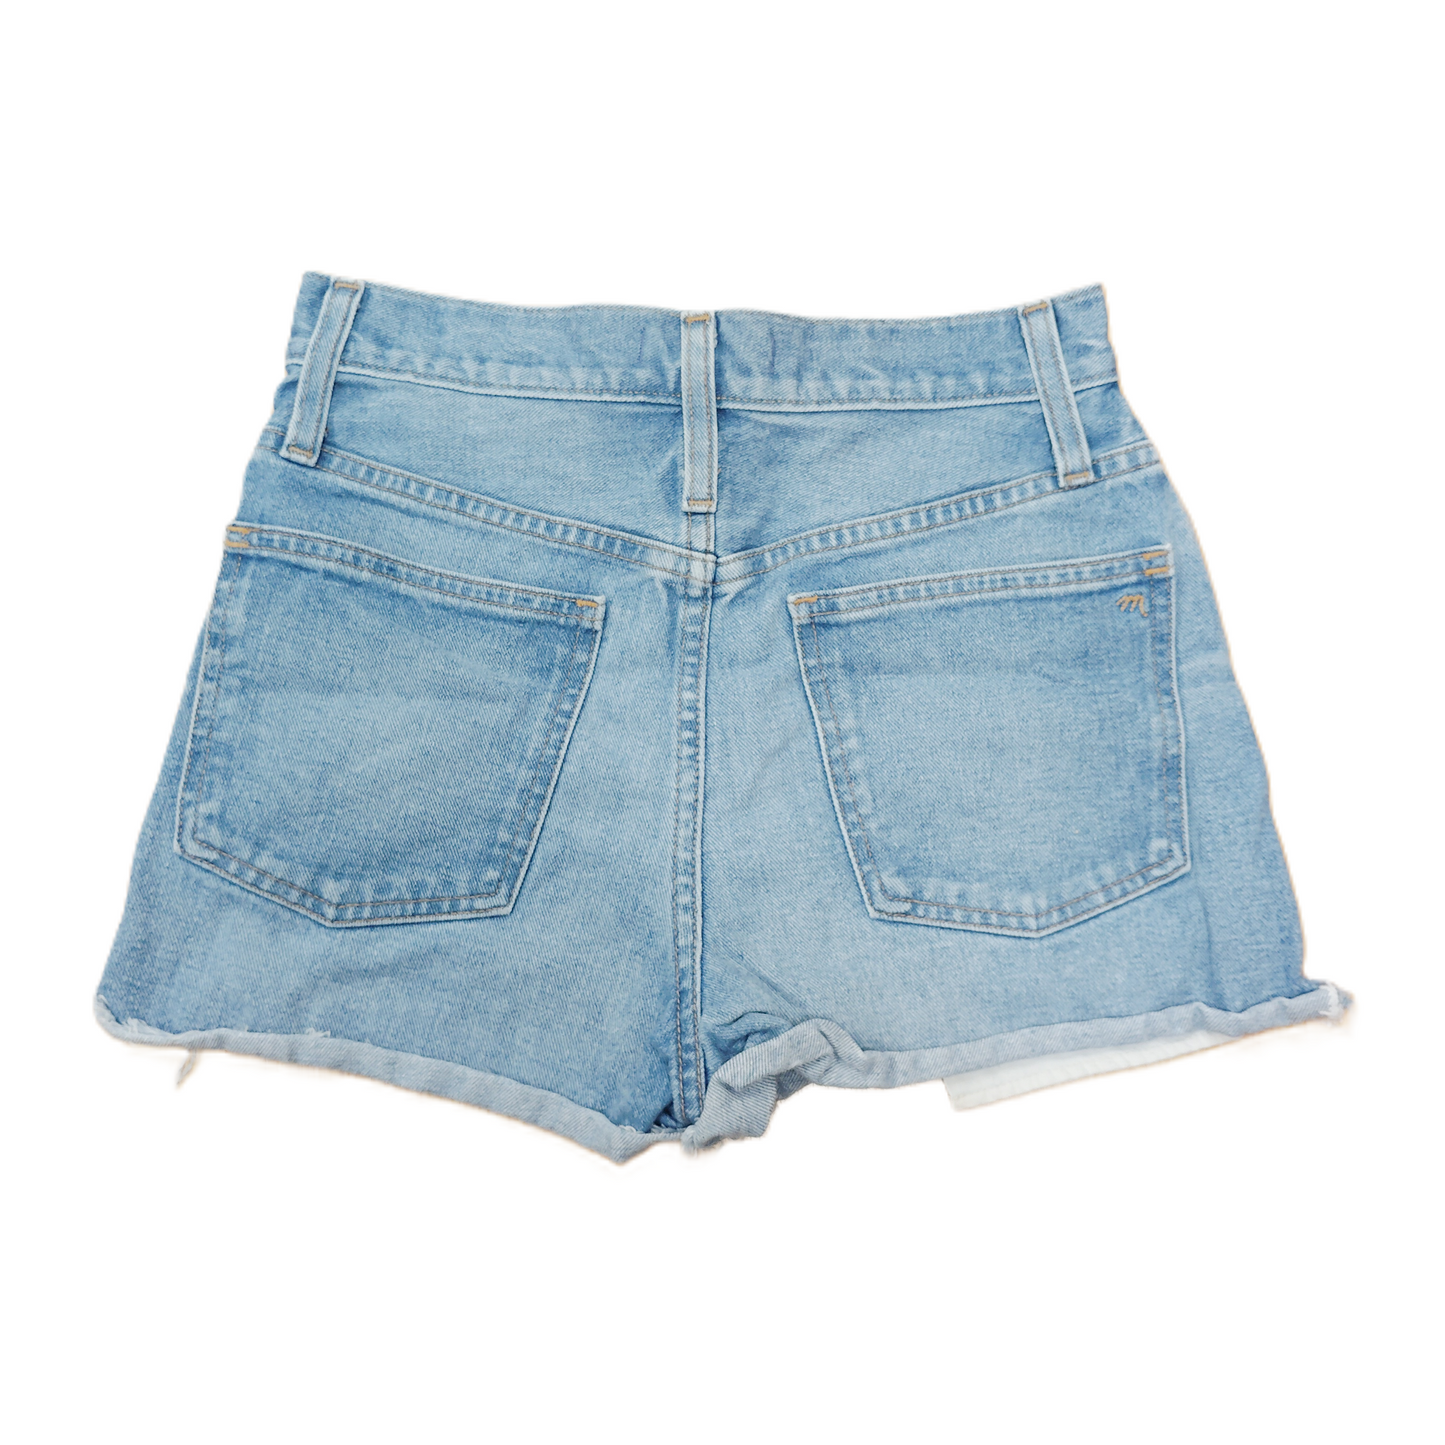 Blue Denim Shorts By Madewell, Size: 0